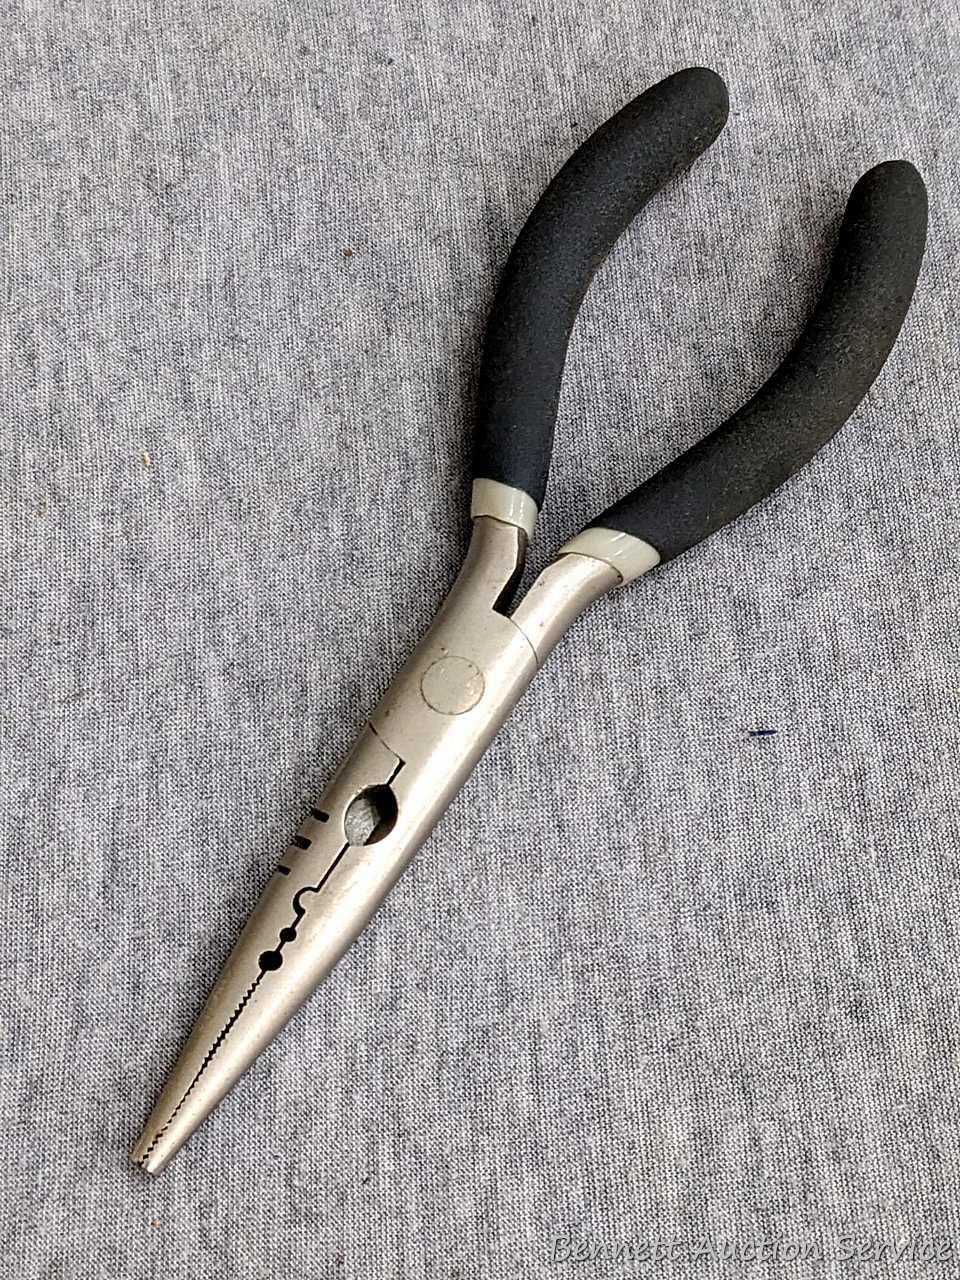 Slender Rapala fishing pliers with case, great